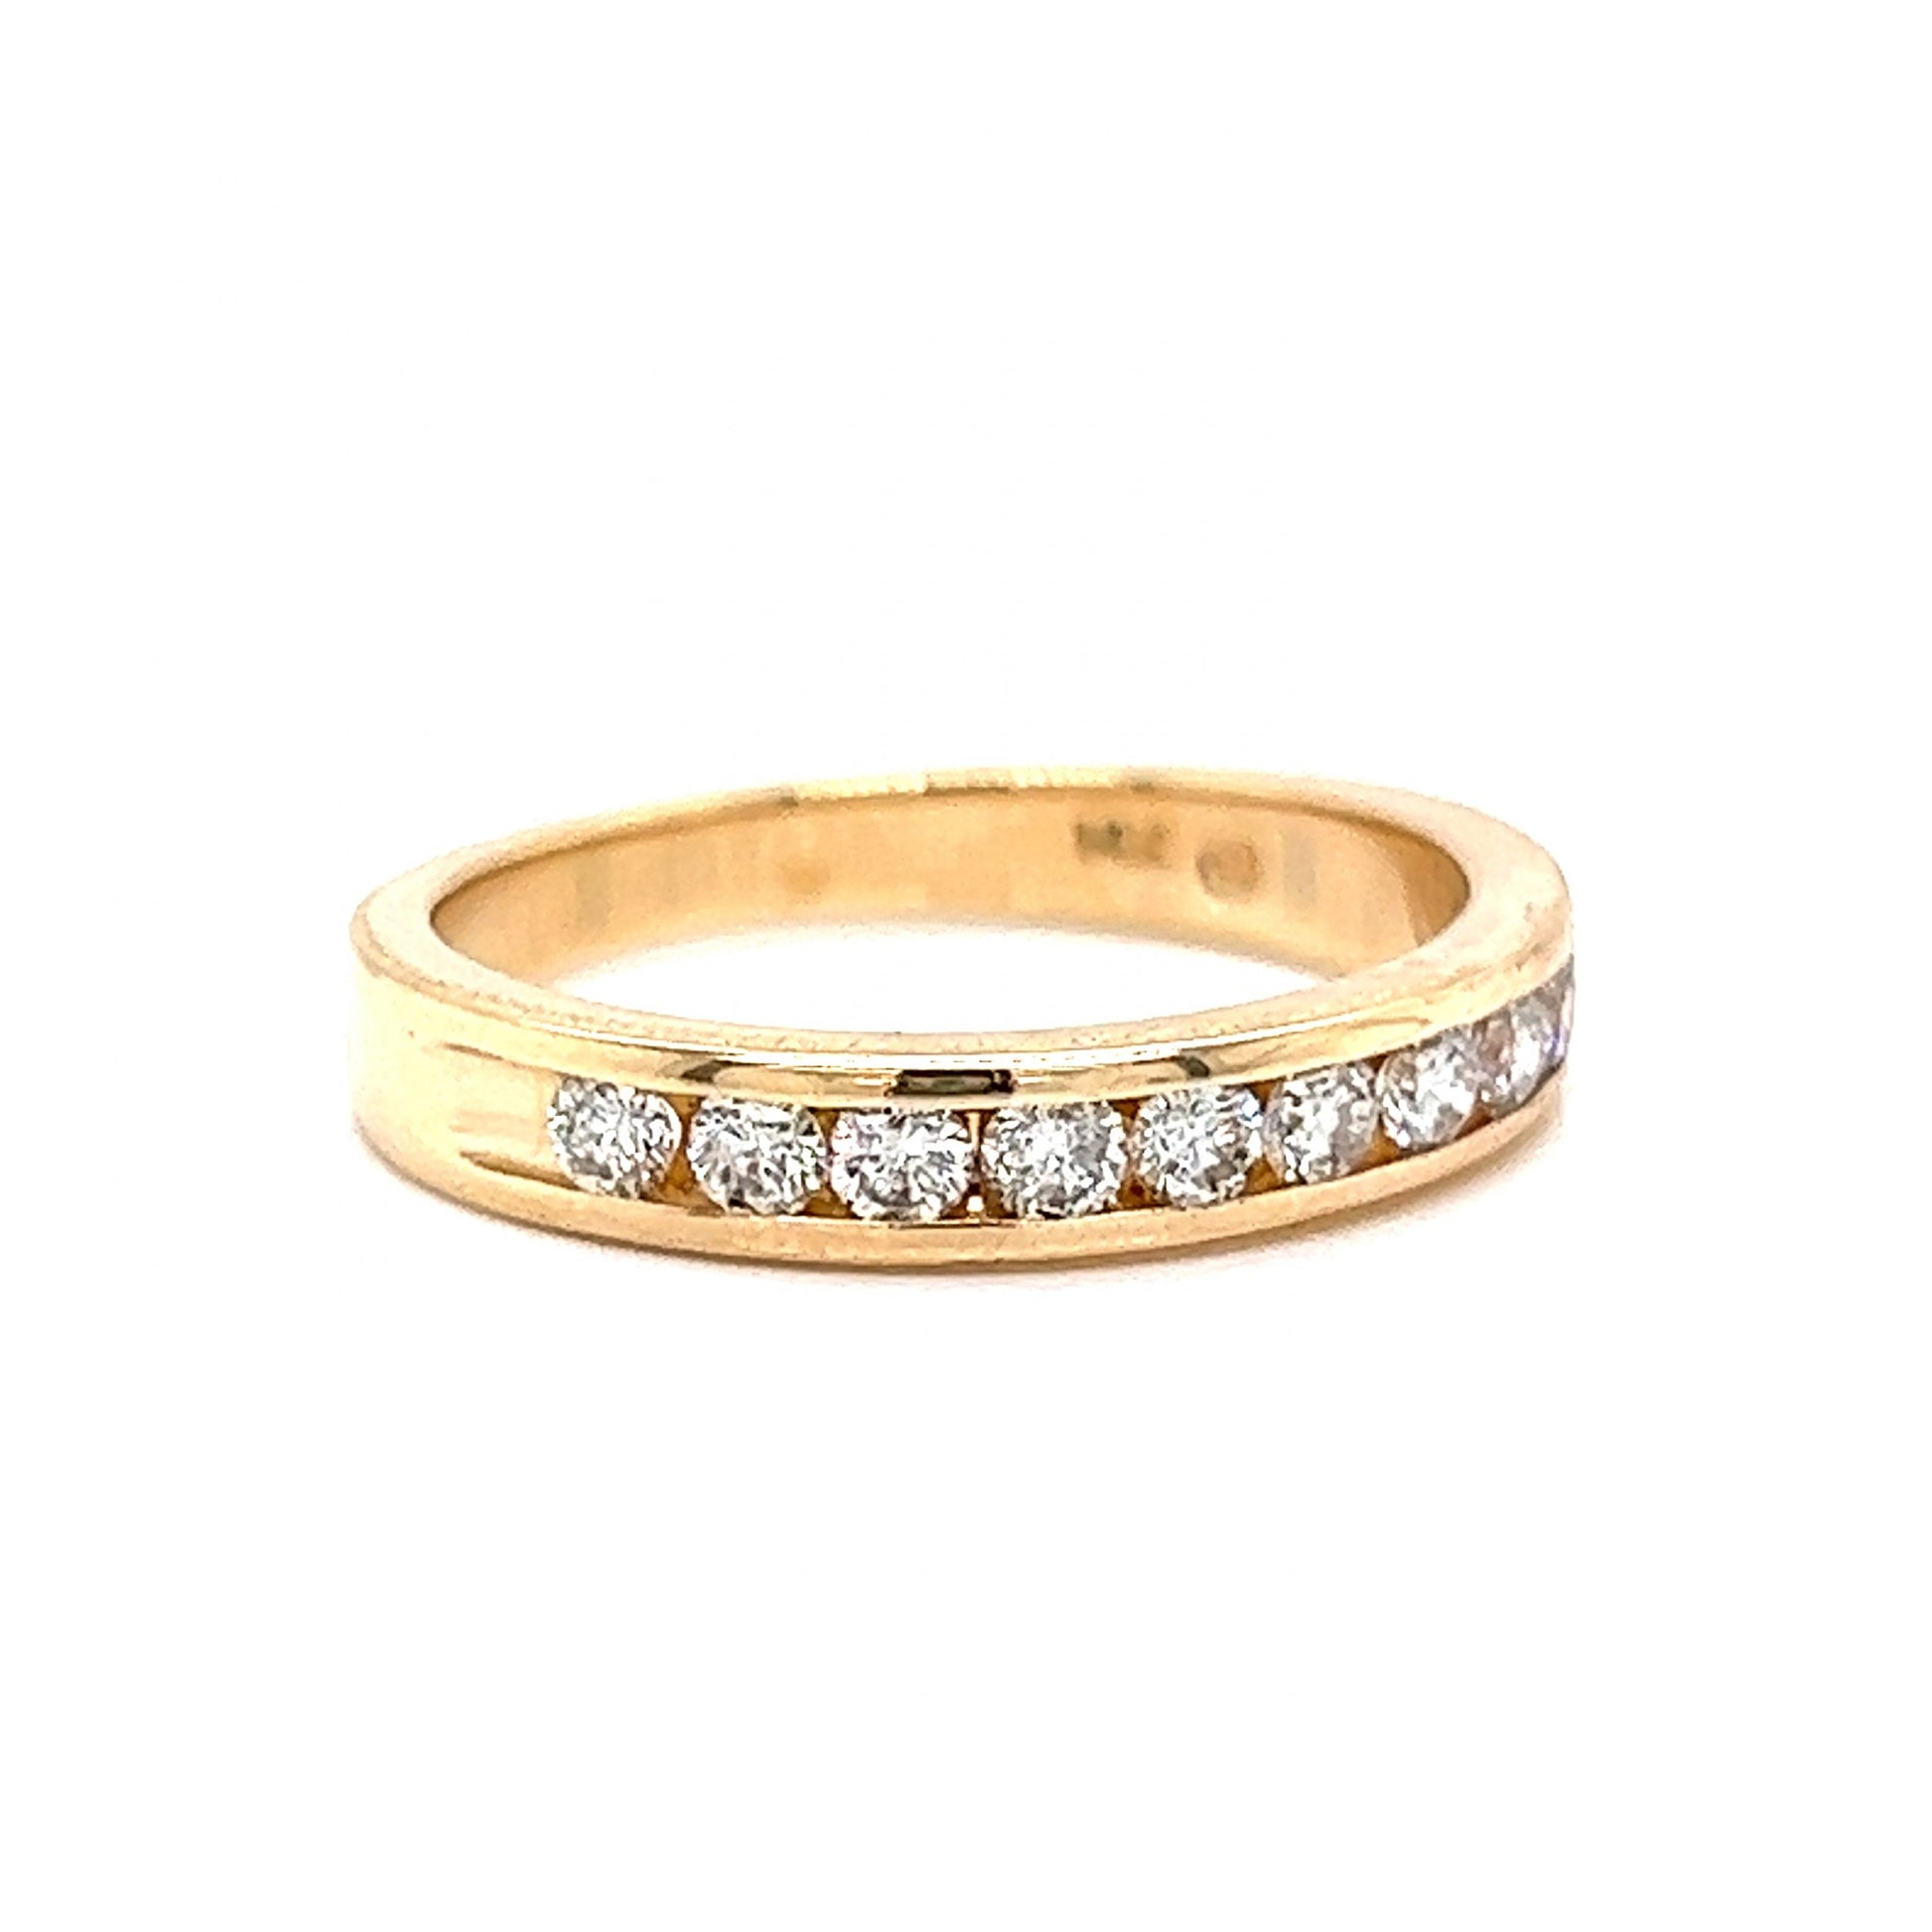 .47 Channel Set Diamond Wedding Band in 14k Yellow GoldComposition: 14 Karat Yellow GoldRing Size: 6.5Total Diamond Weight: .47 ctTotal Gram Weight: 3.3 gInscription: 14k .47 TWN